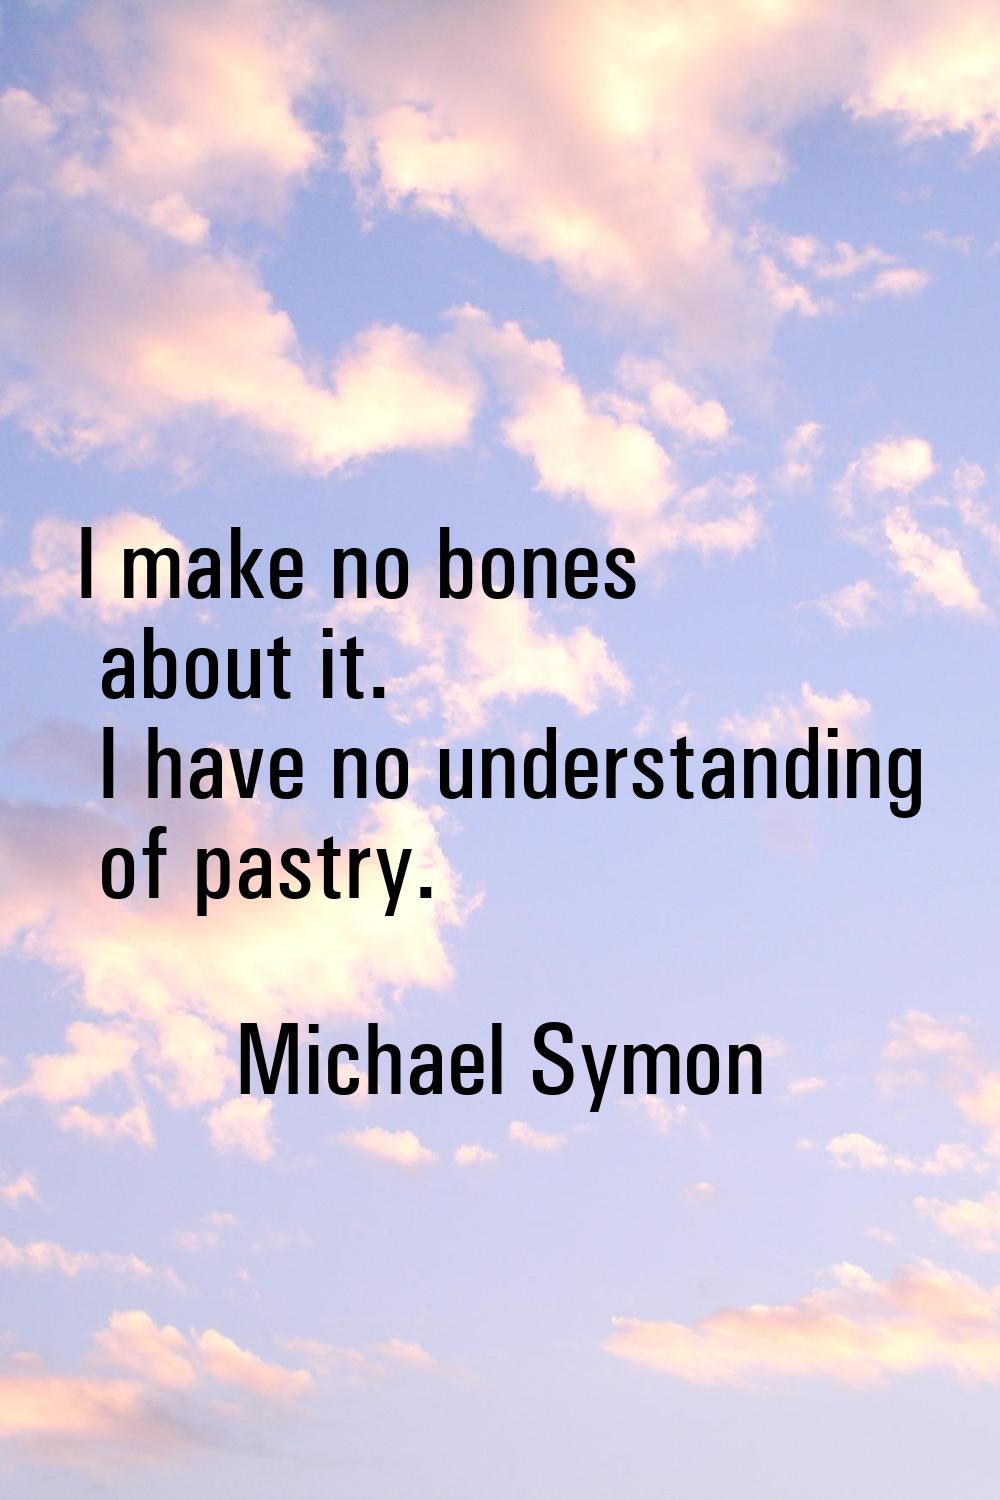 I make no bones about it. I have no understanding of pastry.